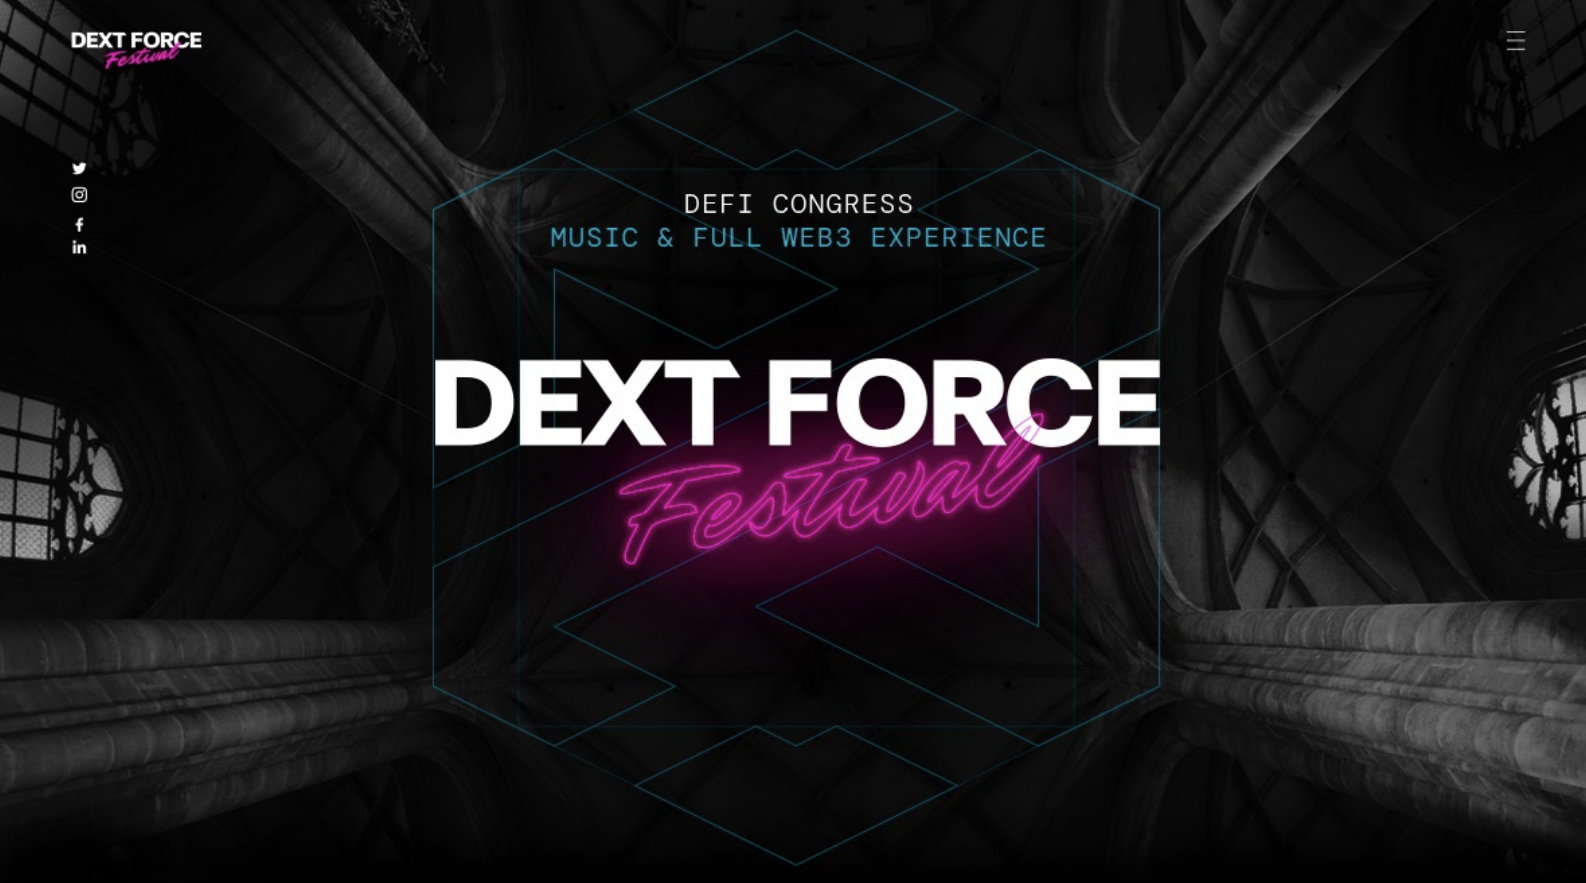 Blockchain, DeFi, Web3, AI. Networking and Electronic Music Festival Combined: The DEXT FORCE Festival, a One-Of-A-Kind Event.